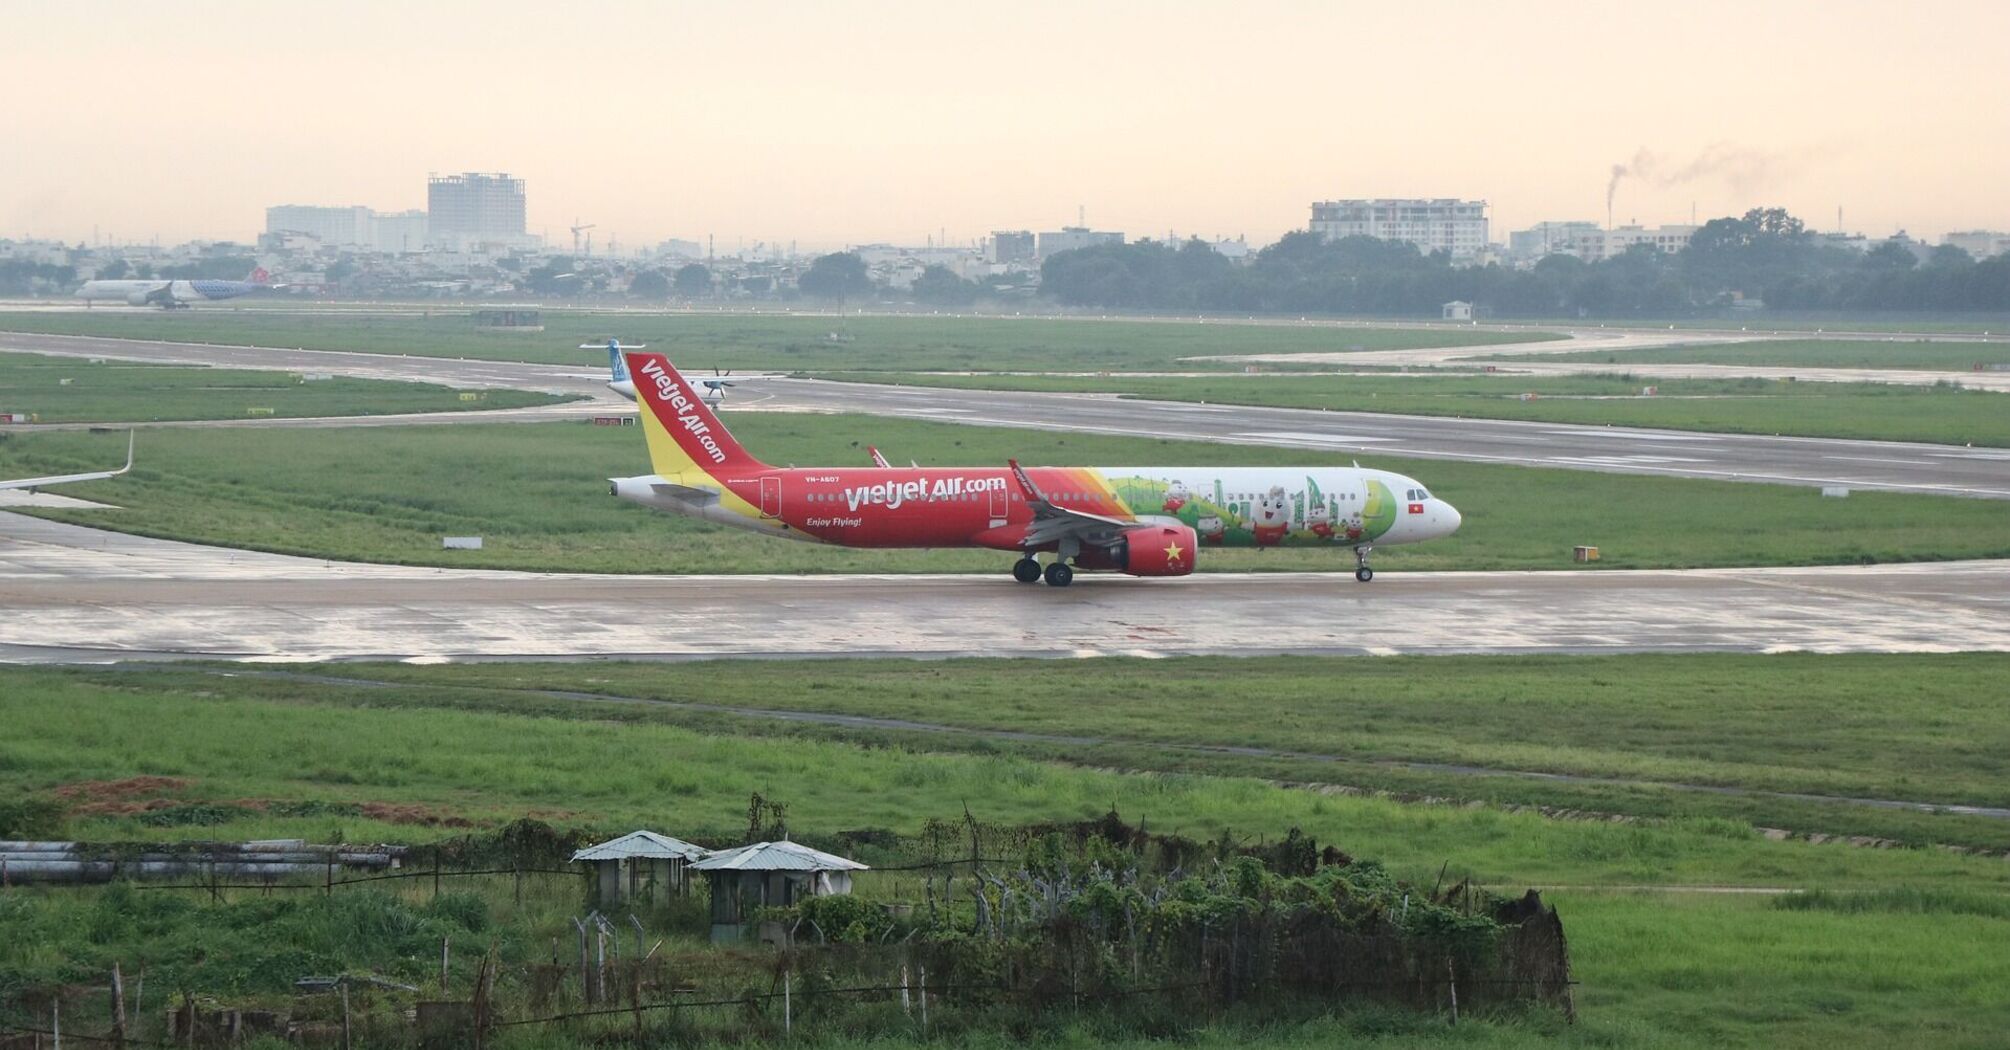 A Vietjet aircraft adorned with colorful decals is taxiing on the tarmac at an airport, with an overcast sky and buildings in the background